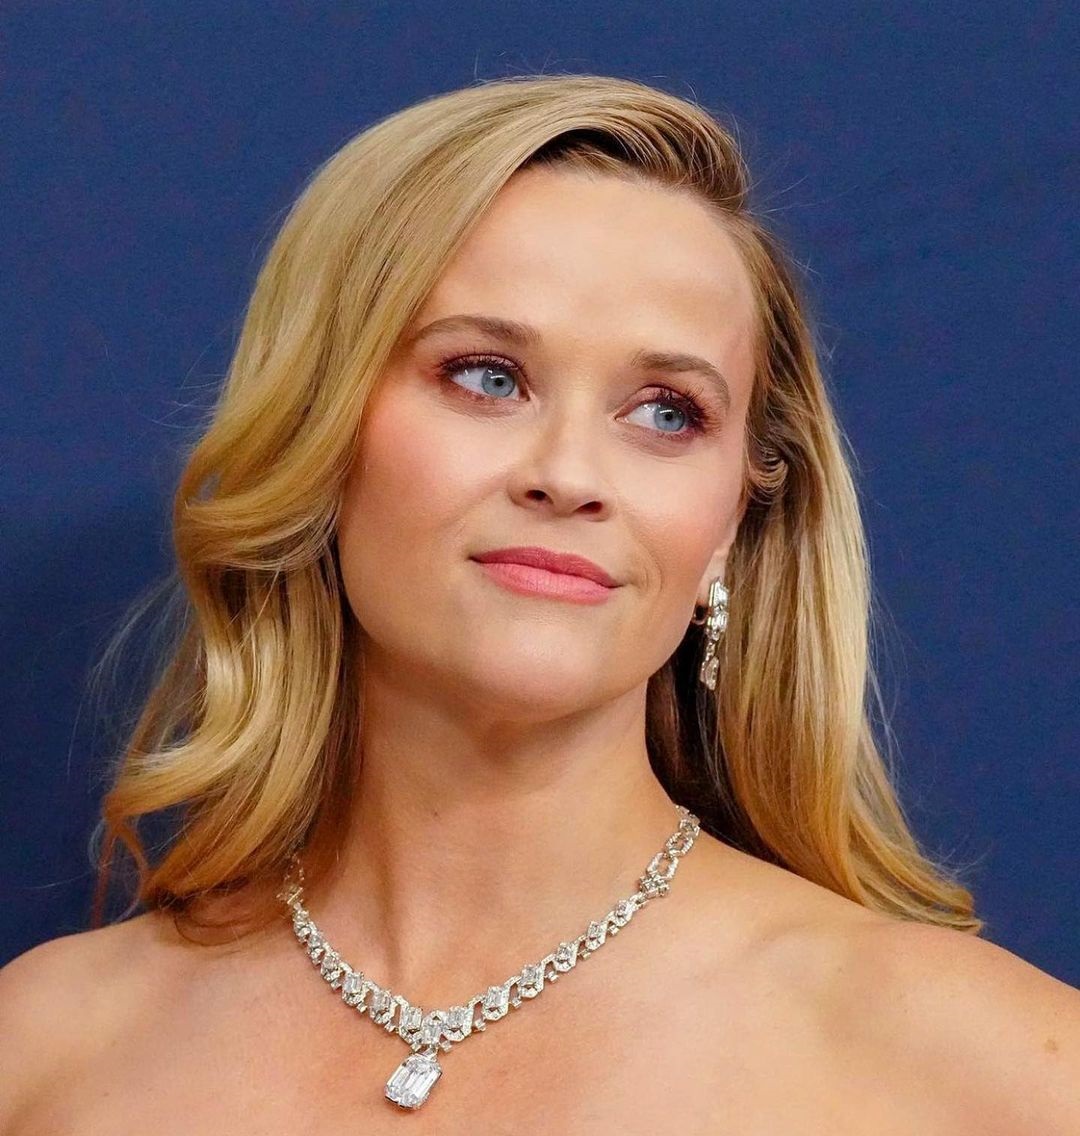 Reese Witherspoon 11 Горячие Фото Девушки, Reese Witherspoon Красивые Фотографии